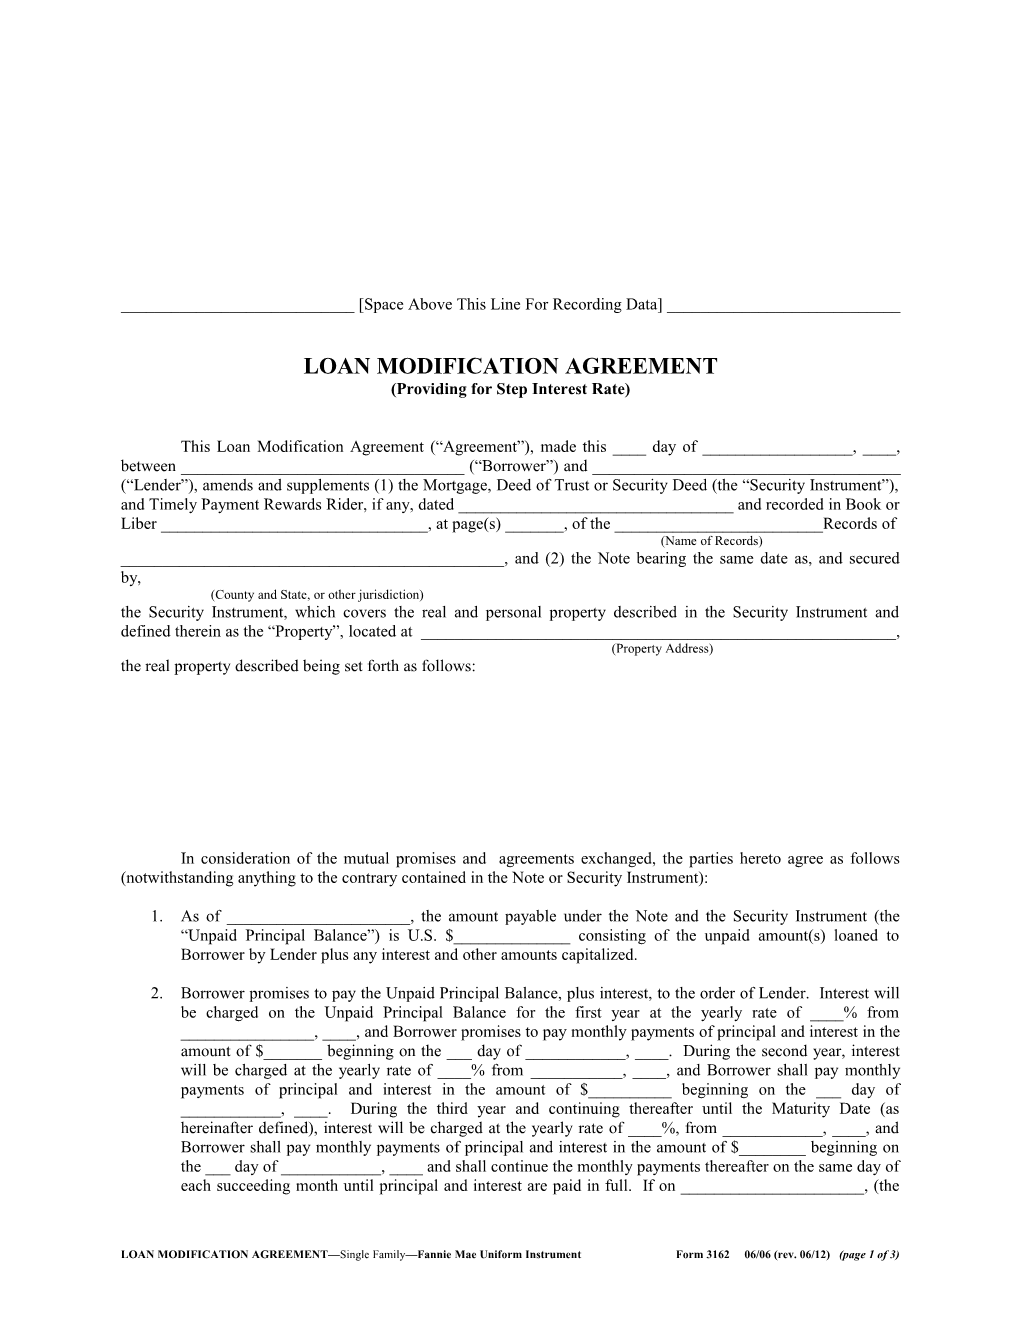 Loan Modification Agreement (Form 3162): Word